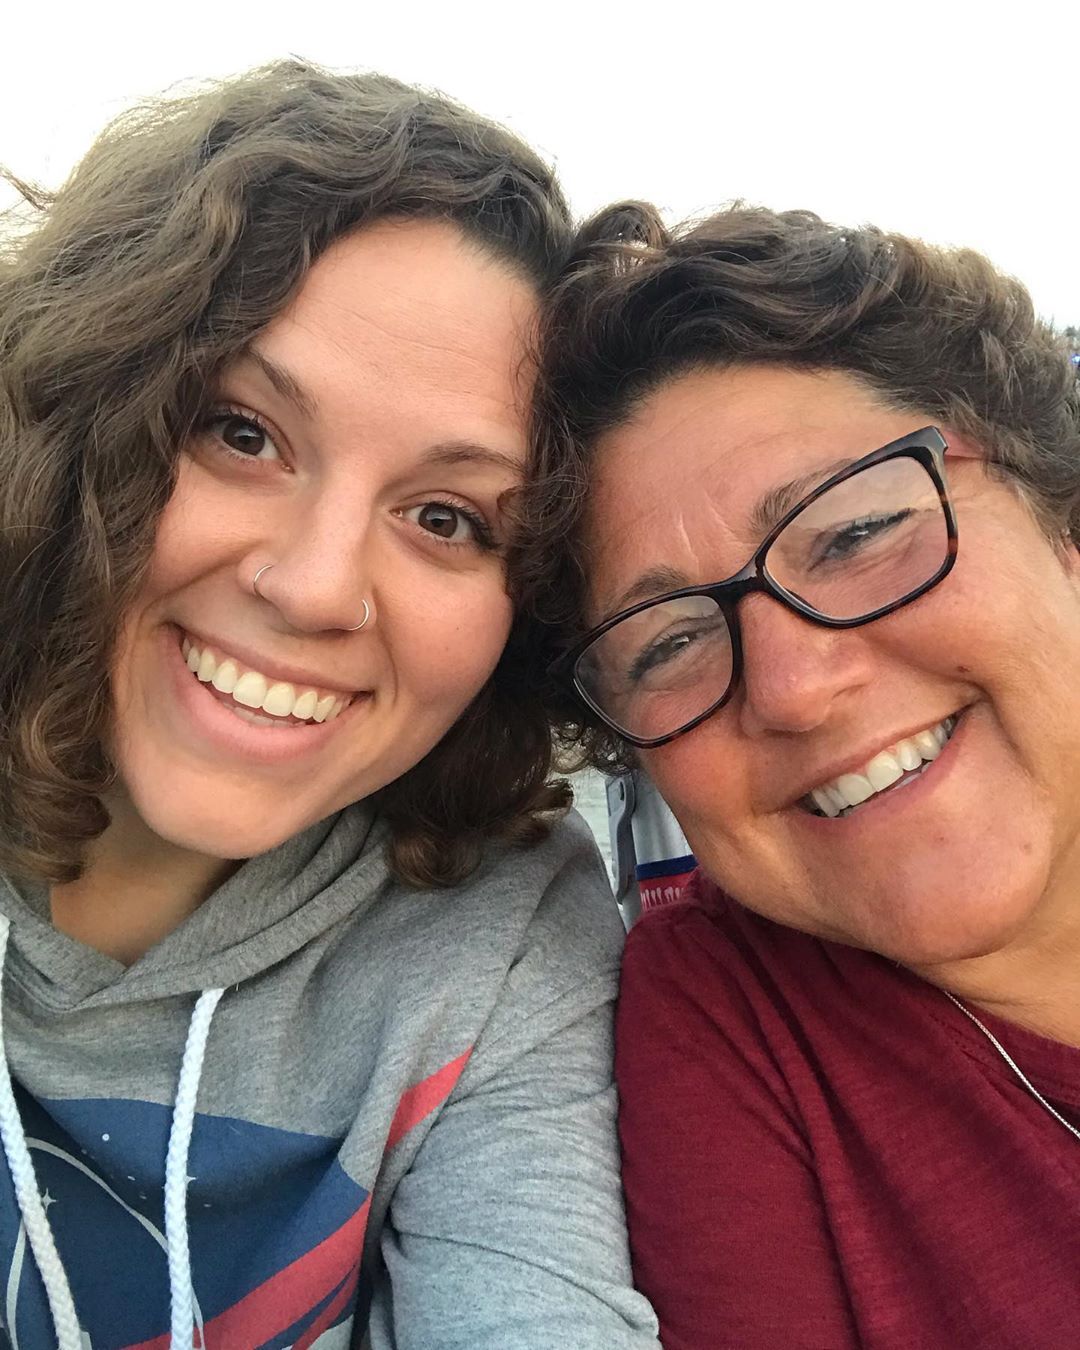 Waiting for fireworks with my favorite mom. â± . #fourthofjuly (at Fishermanâs Beach) https://www.instagram.com/p/Bzeb6YDnLa7/?igshid=1f9v3x7ykdjai